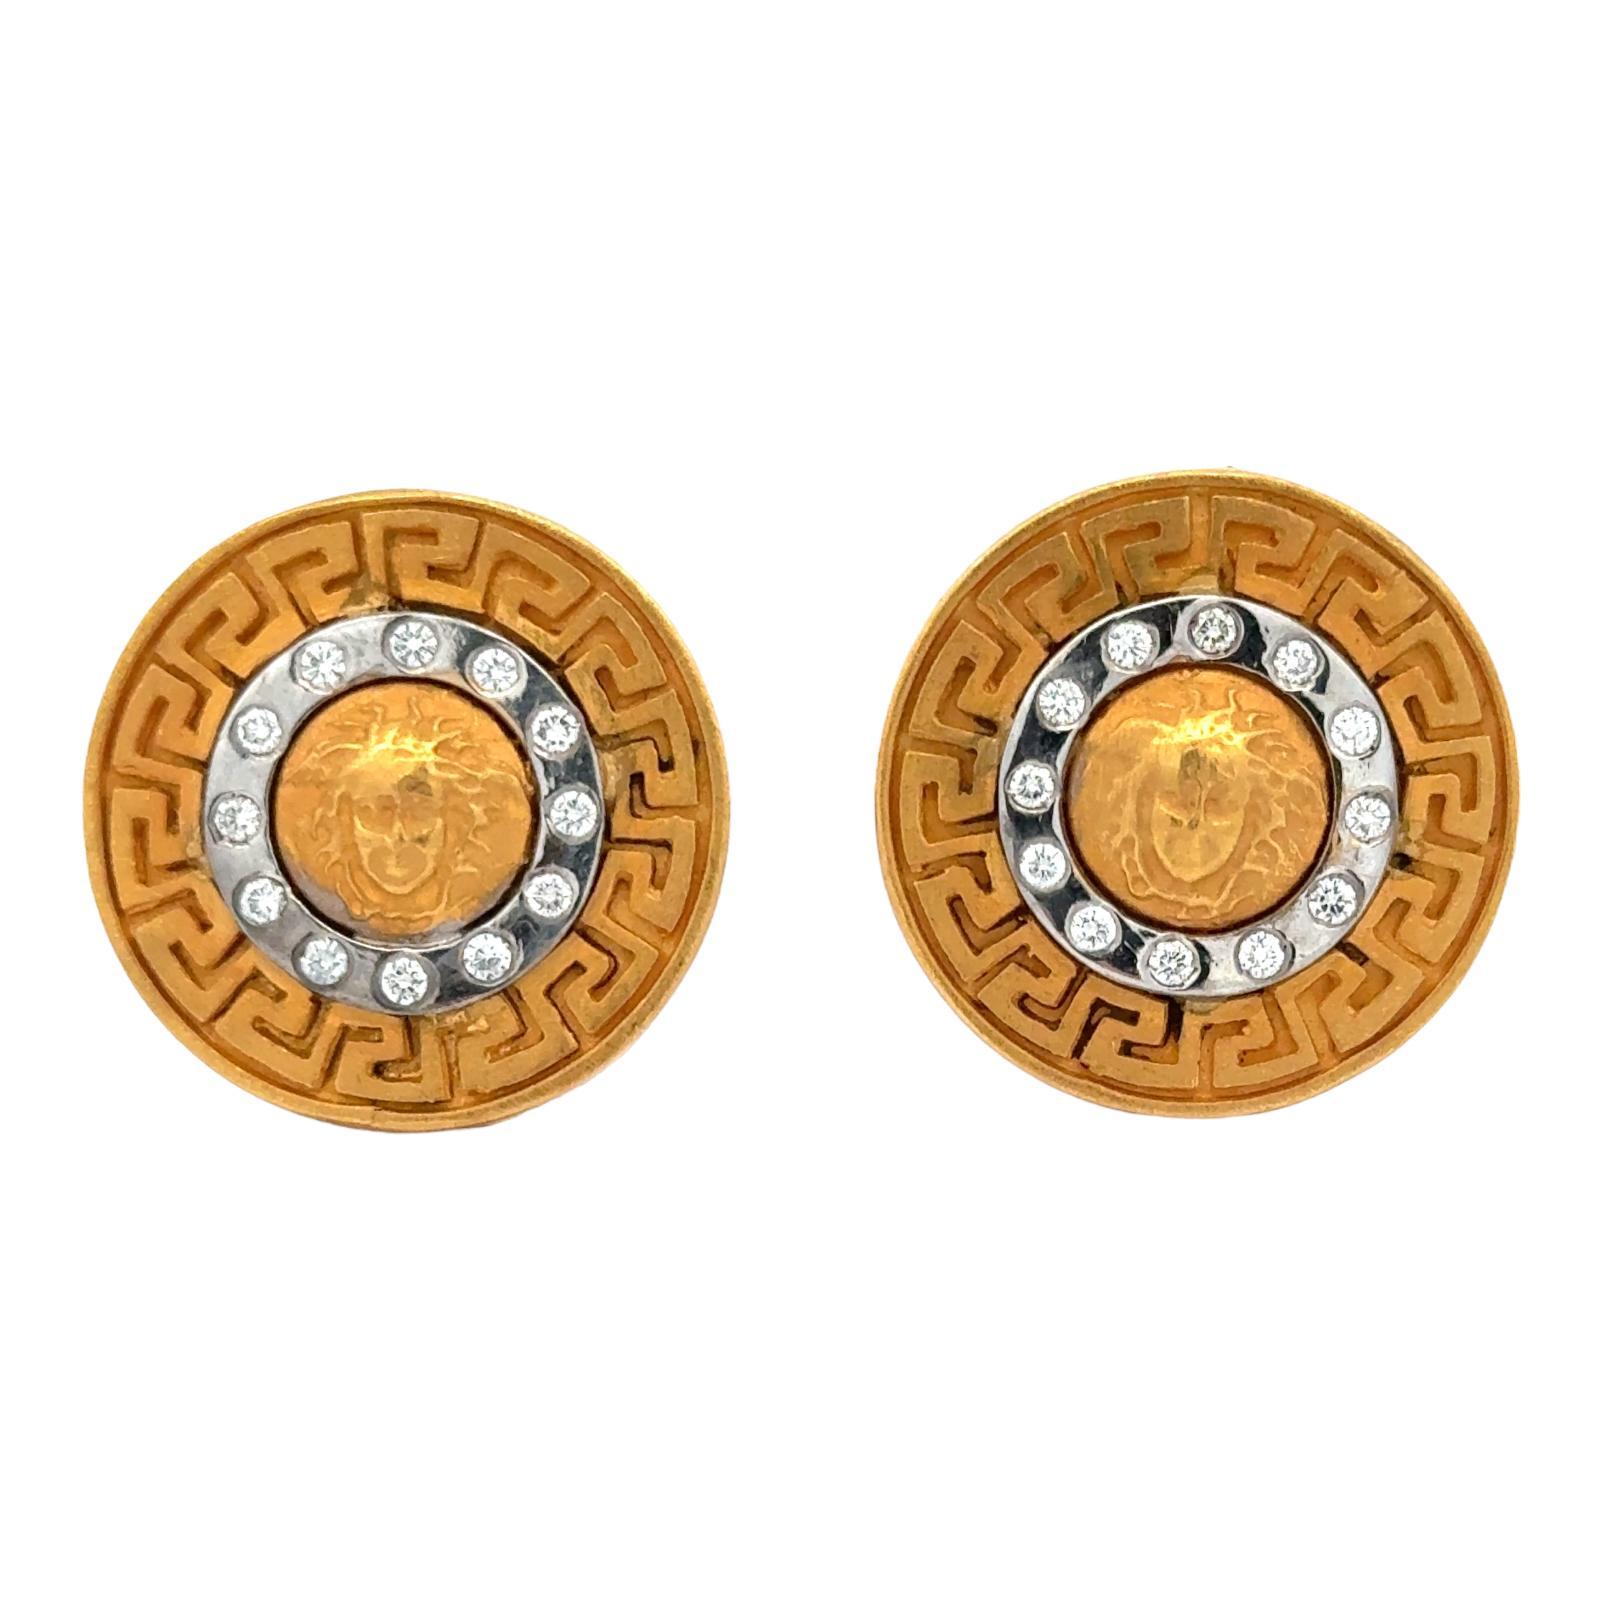 Greek key and medusa design diamond cufflinks crafted in 21 karat yellow gold. The cufflink findings are 14 karat yellow gold. Twenty four round brilliant cut diamonds weigh approximately .48 CTW and are graded G-H color and SI clarity. The